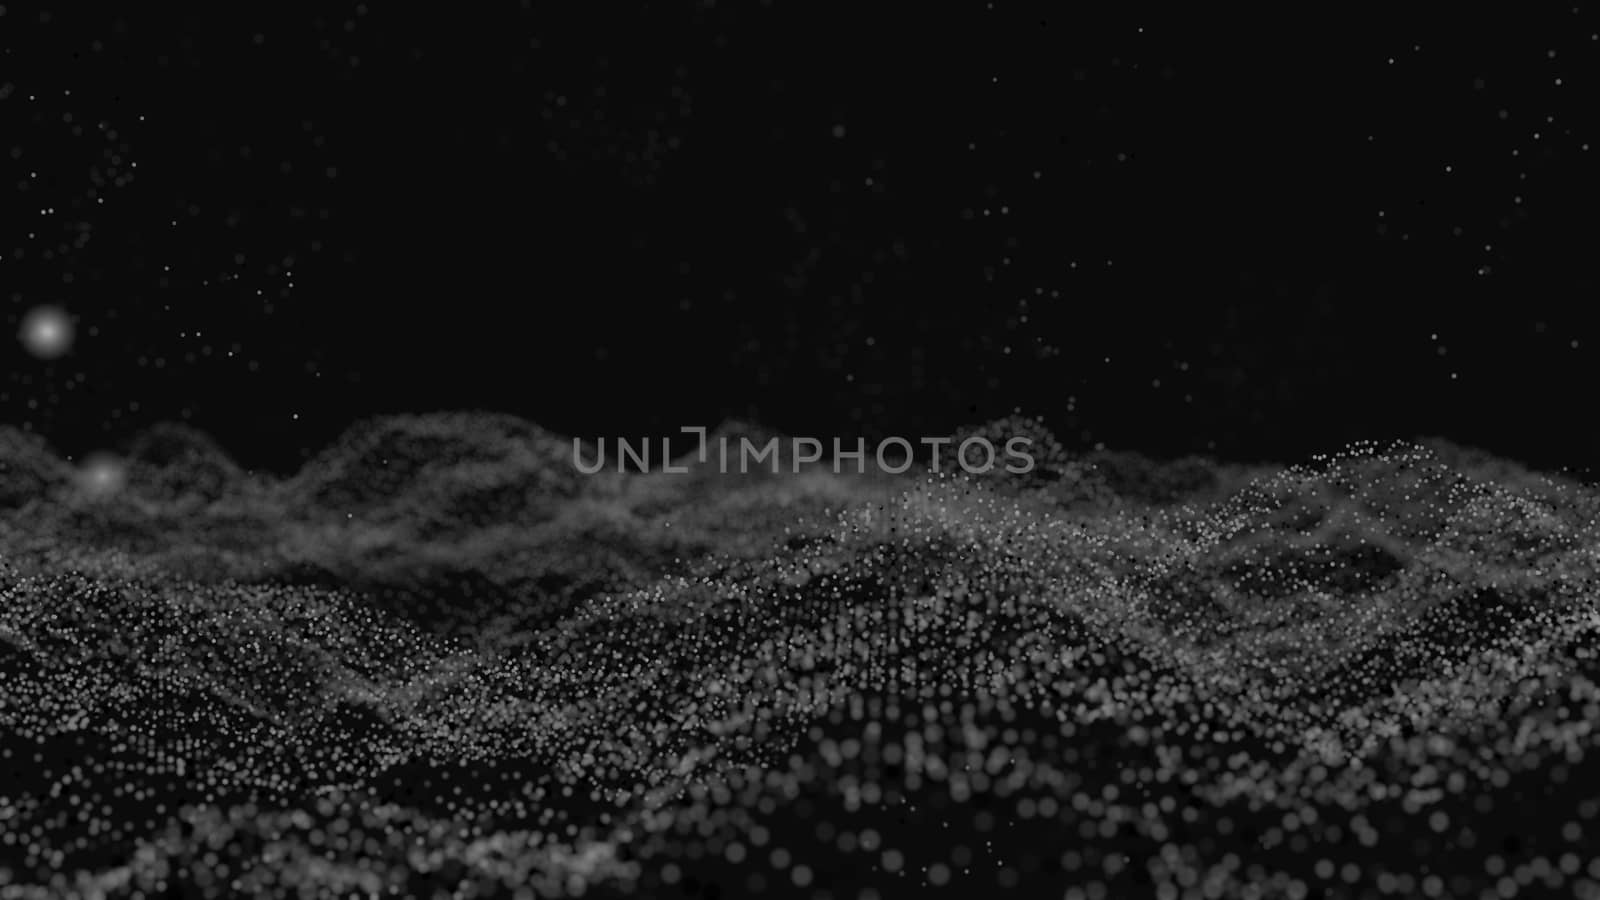 Abstract digital background with cybernetic particles. 3D illustration